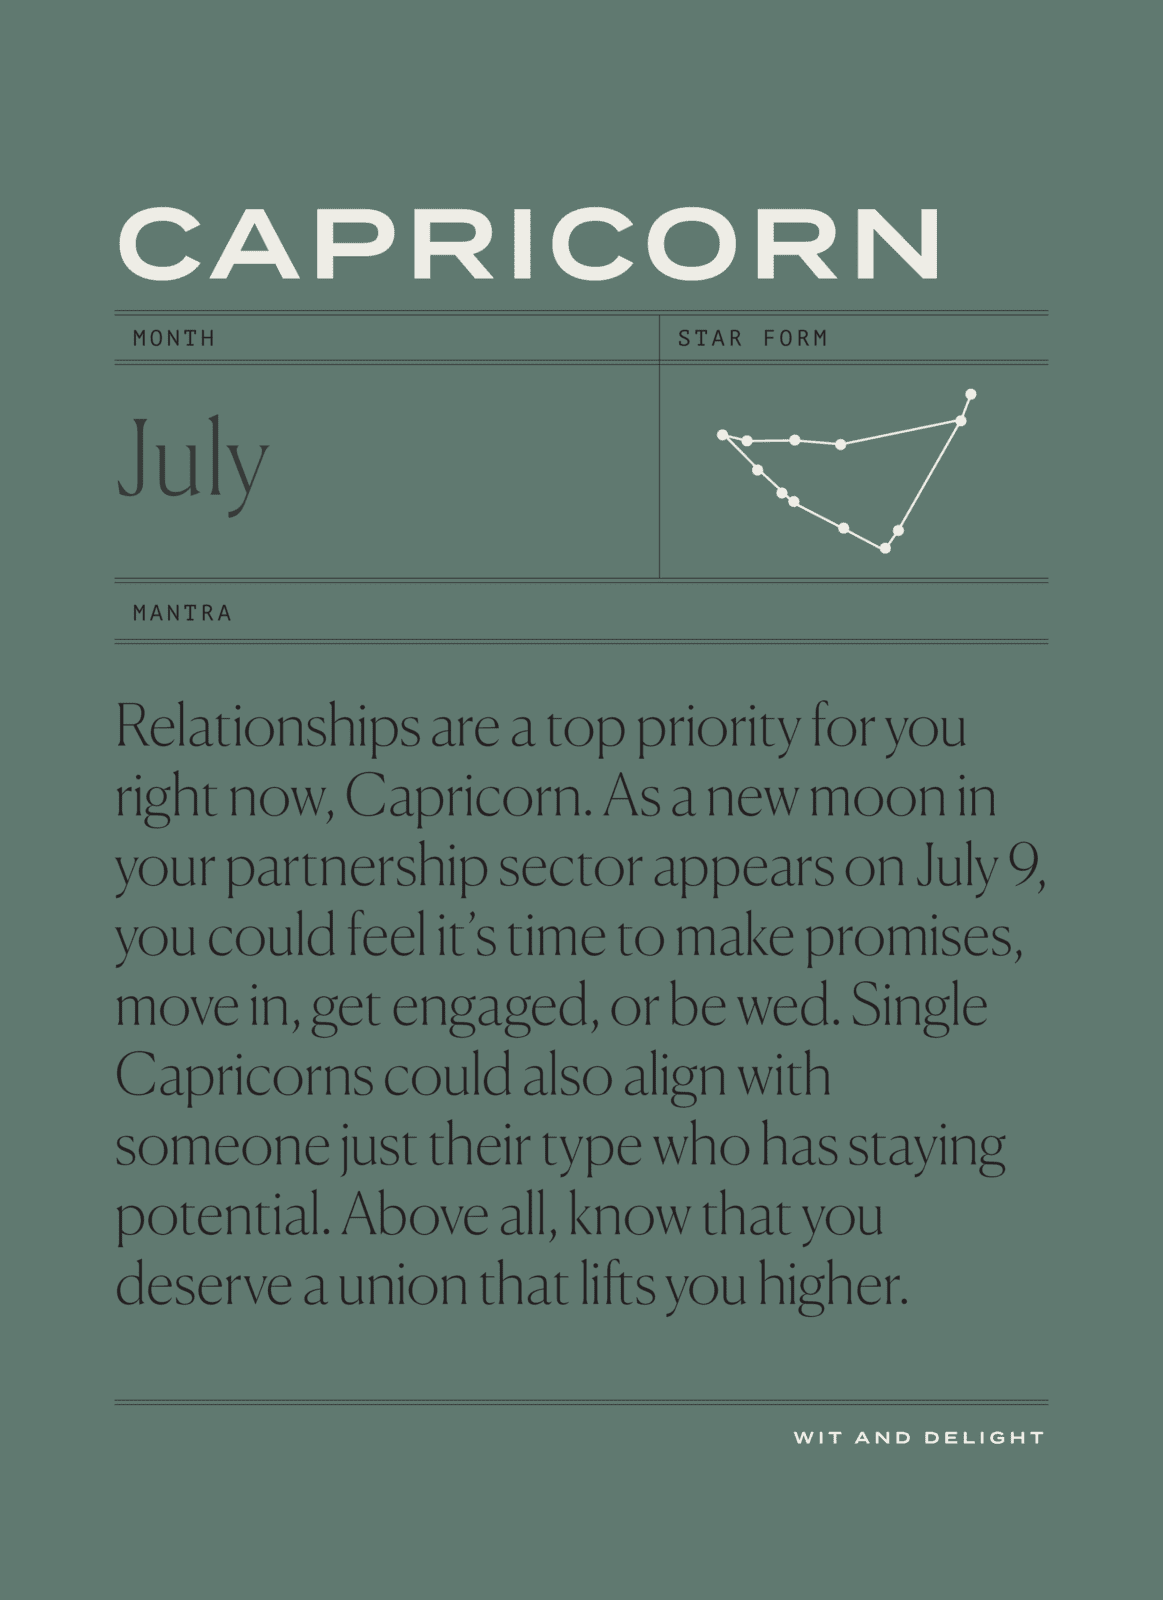 July 2021 Horoscopes: Live Life to the Fullest | Wit & Delight